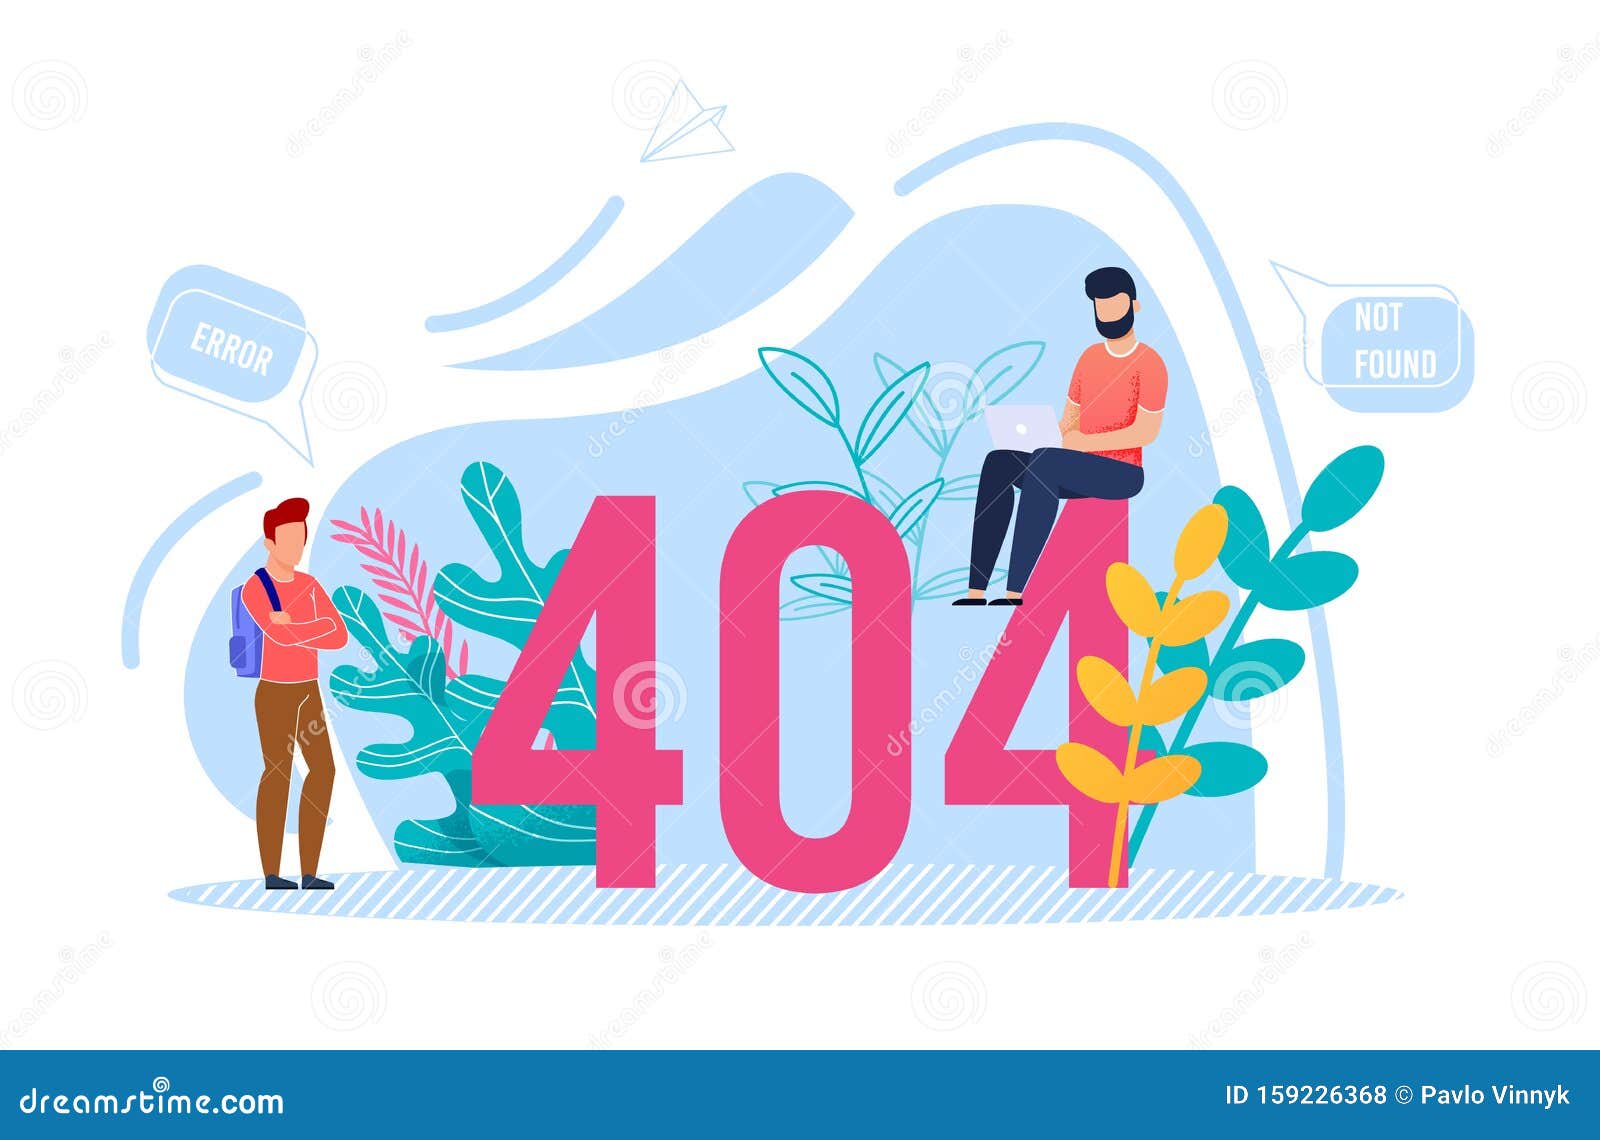 requested page not found 404 error flat poster